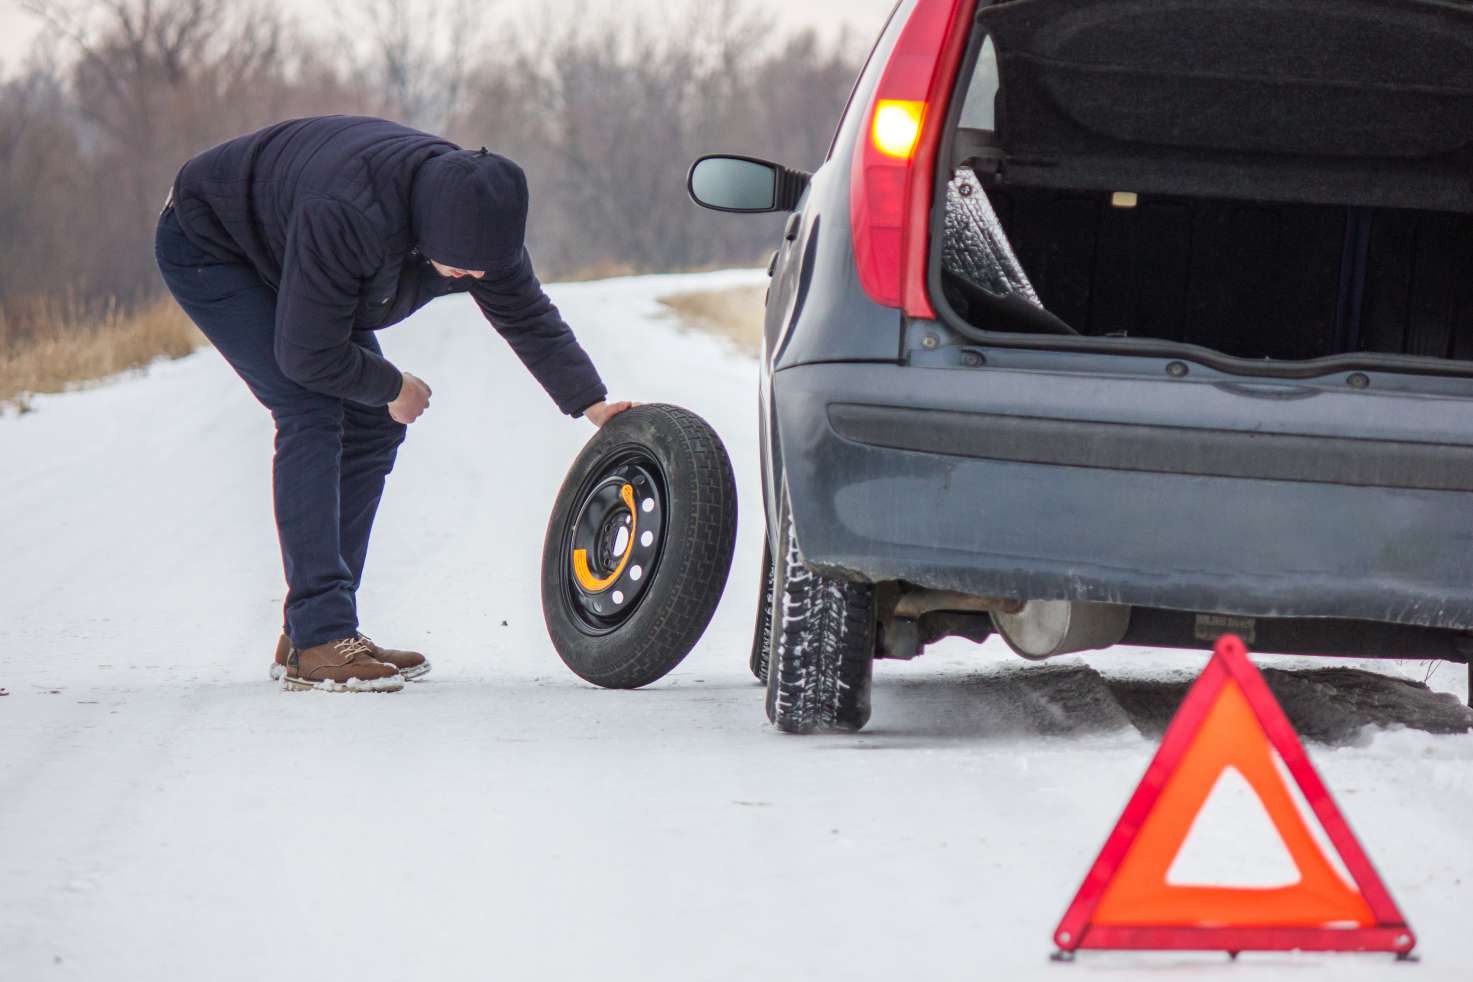 Man changing a tire on his car in the winter. A pylon is set up for passing cars.